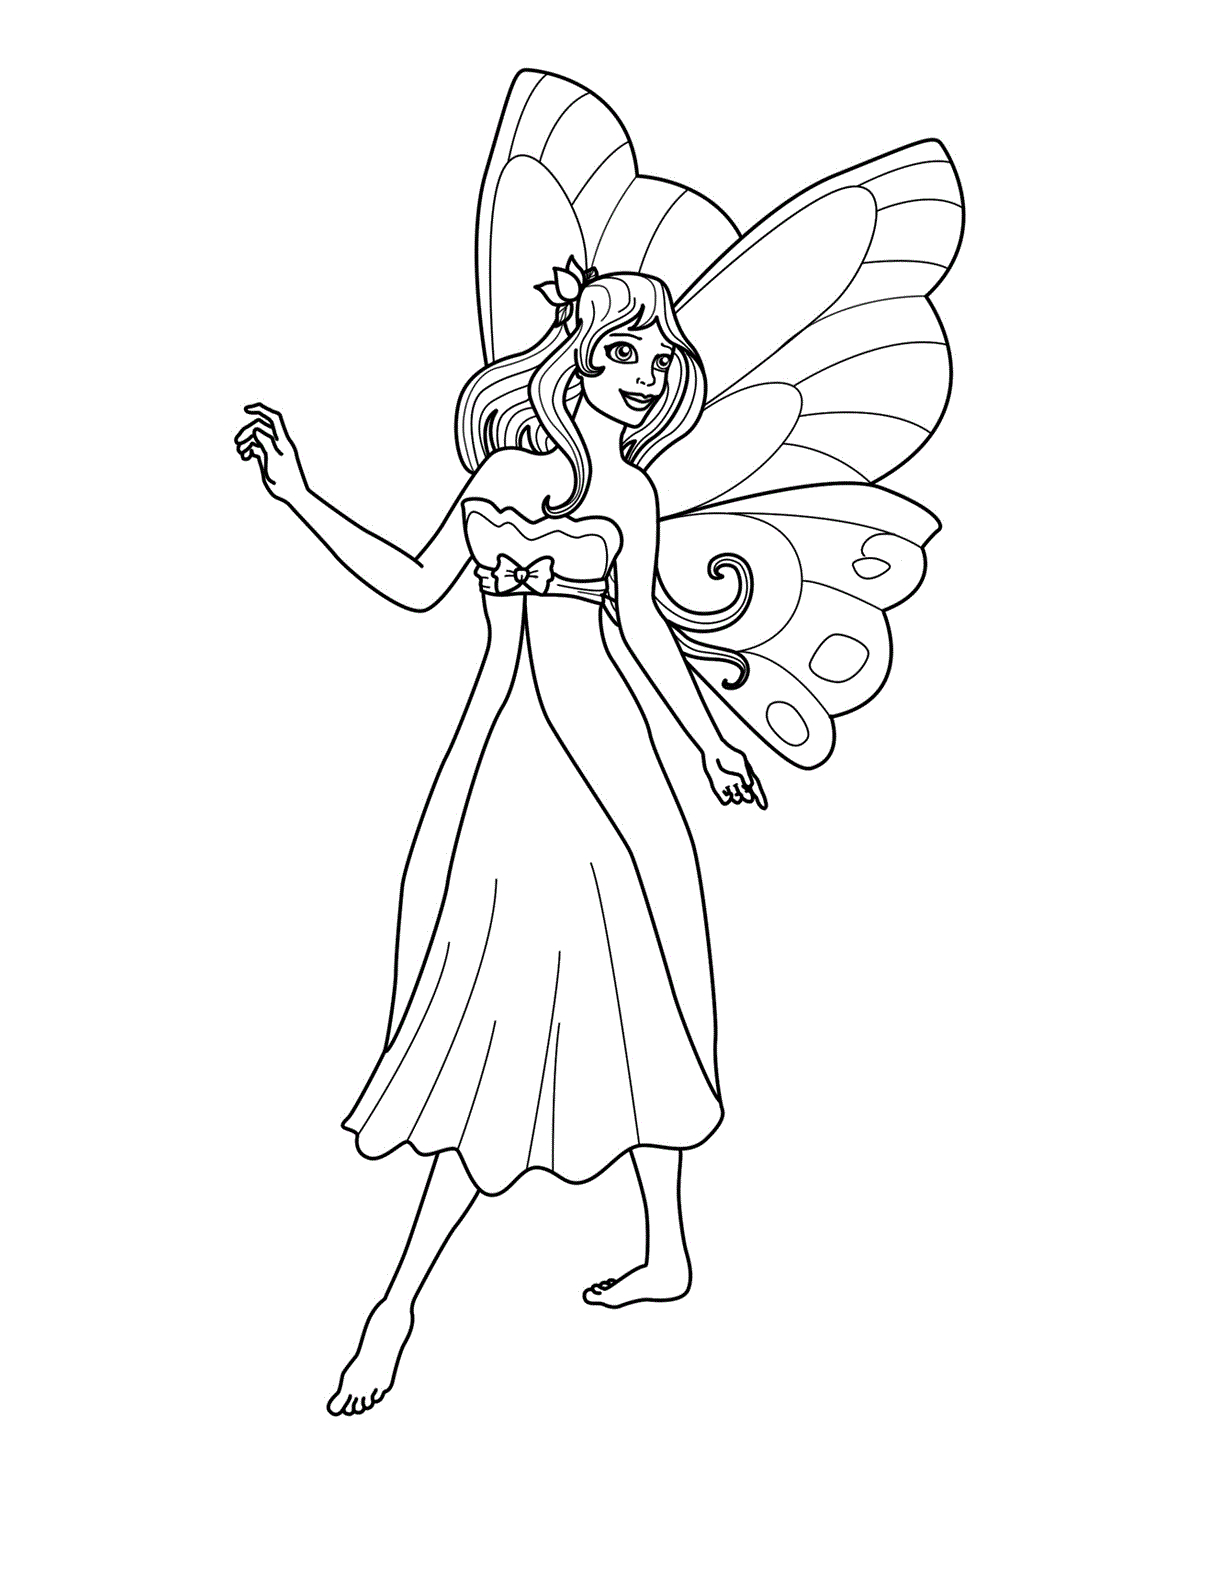 Free Printable Coloring Pages Fairies Adults Coloring Coloring Pages Fairies Disney Silvermist Free Fairy Books